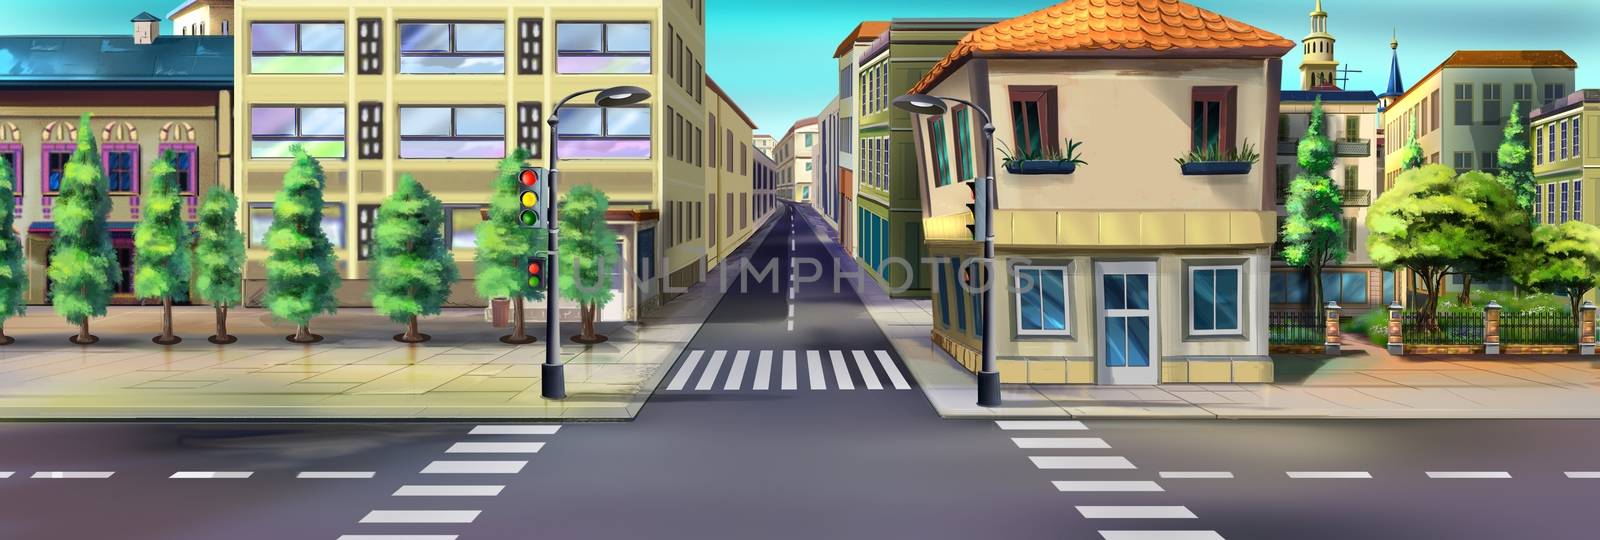 City streets. Image 02 by Multipedia